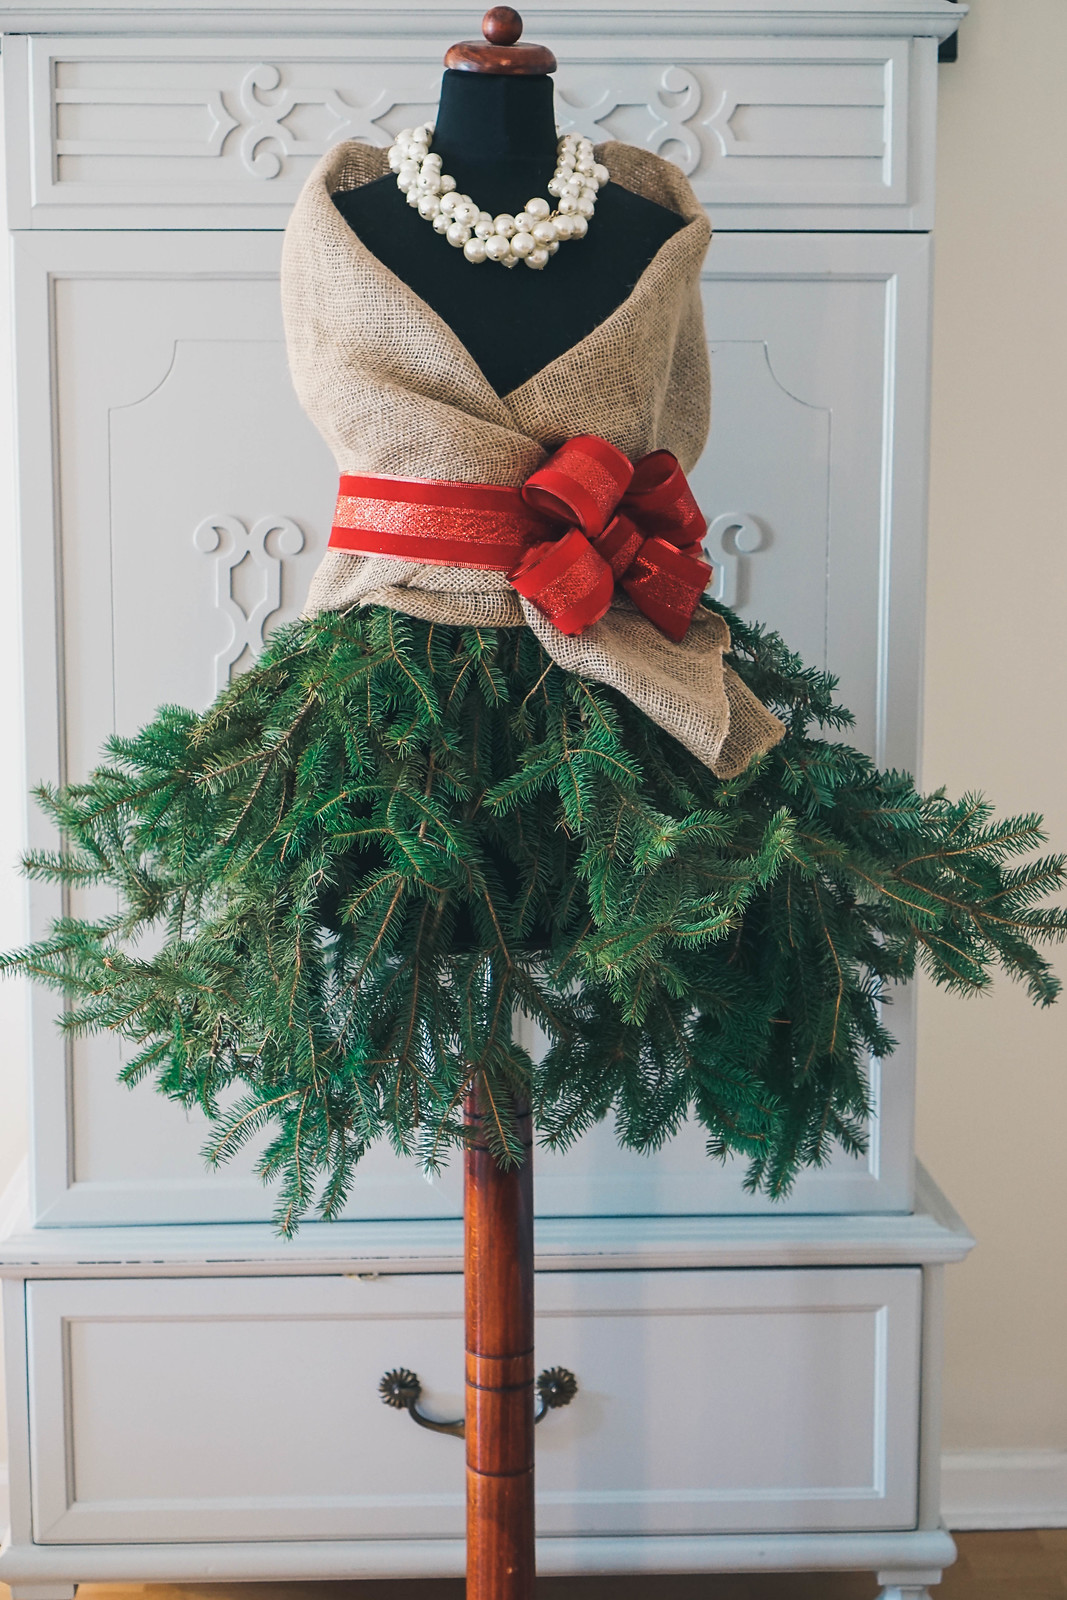 DIY Mannequin Christmas Tree | How to Make a Mannequin Christmas Tree | DIY Christmas Decorations | Christmas Decor | Holiday Decorations | Shabby Chic Christmas